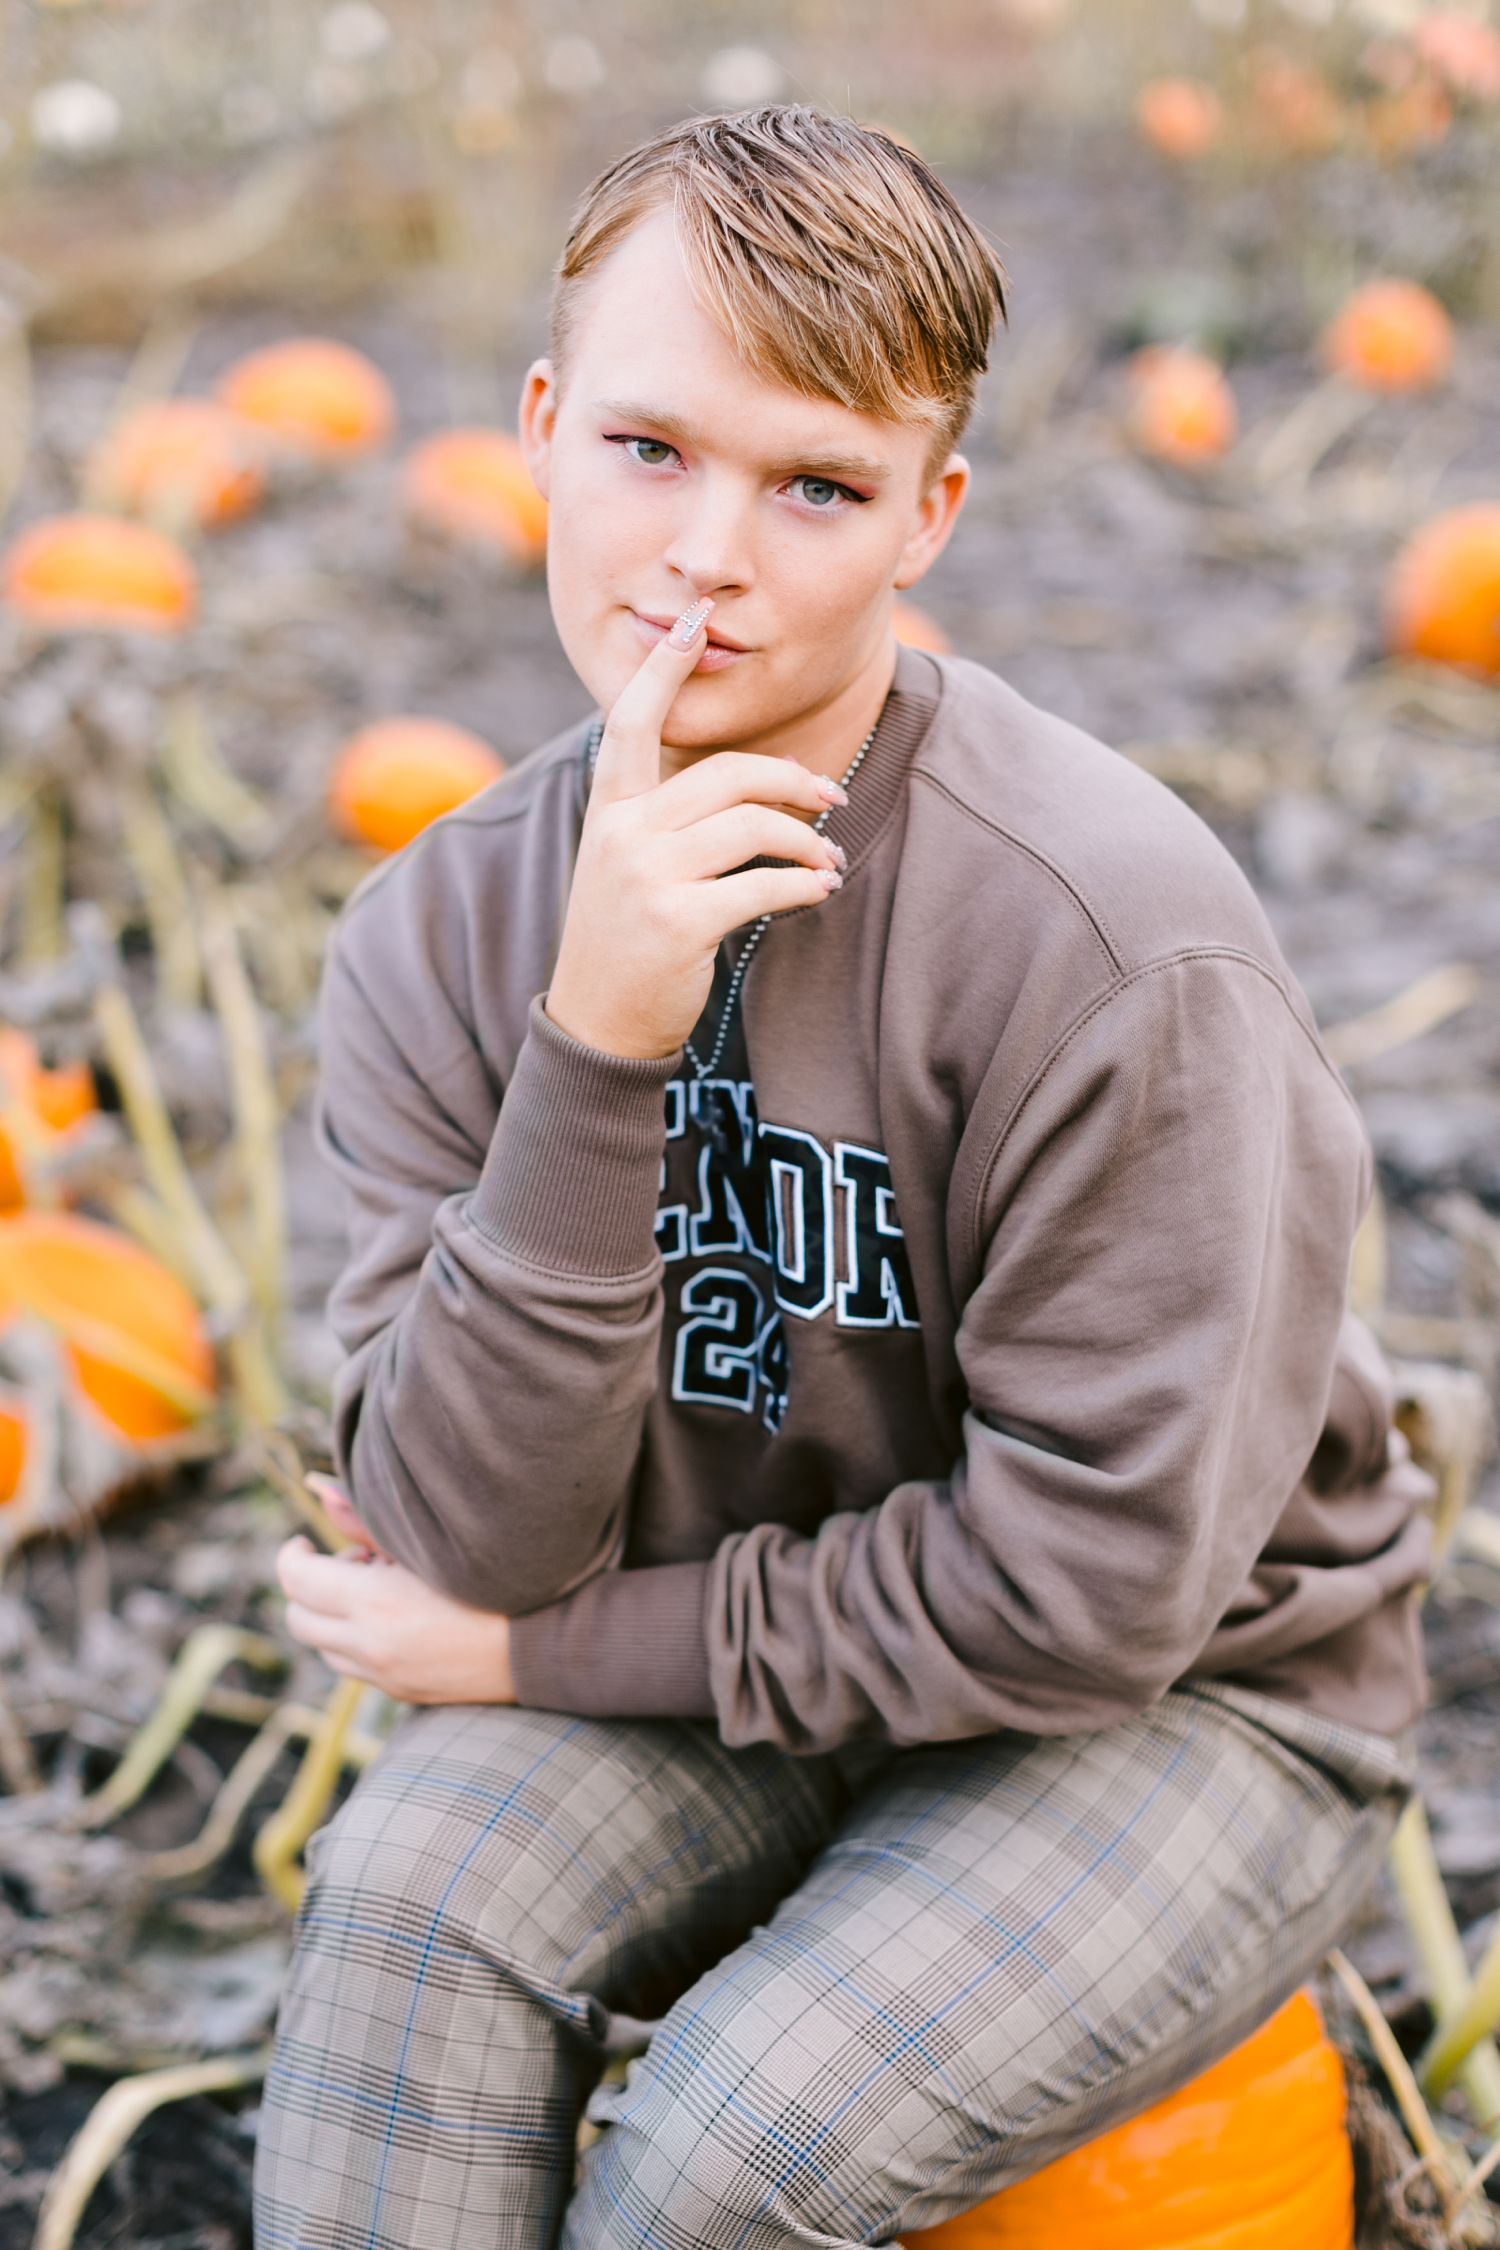 Seth sits on a pumpkin in the middle of a pumpkin field at Bode's Moonlight Farm | CB Studio